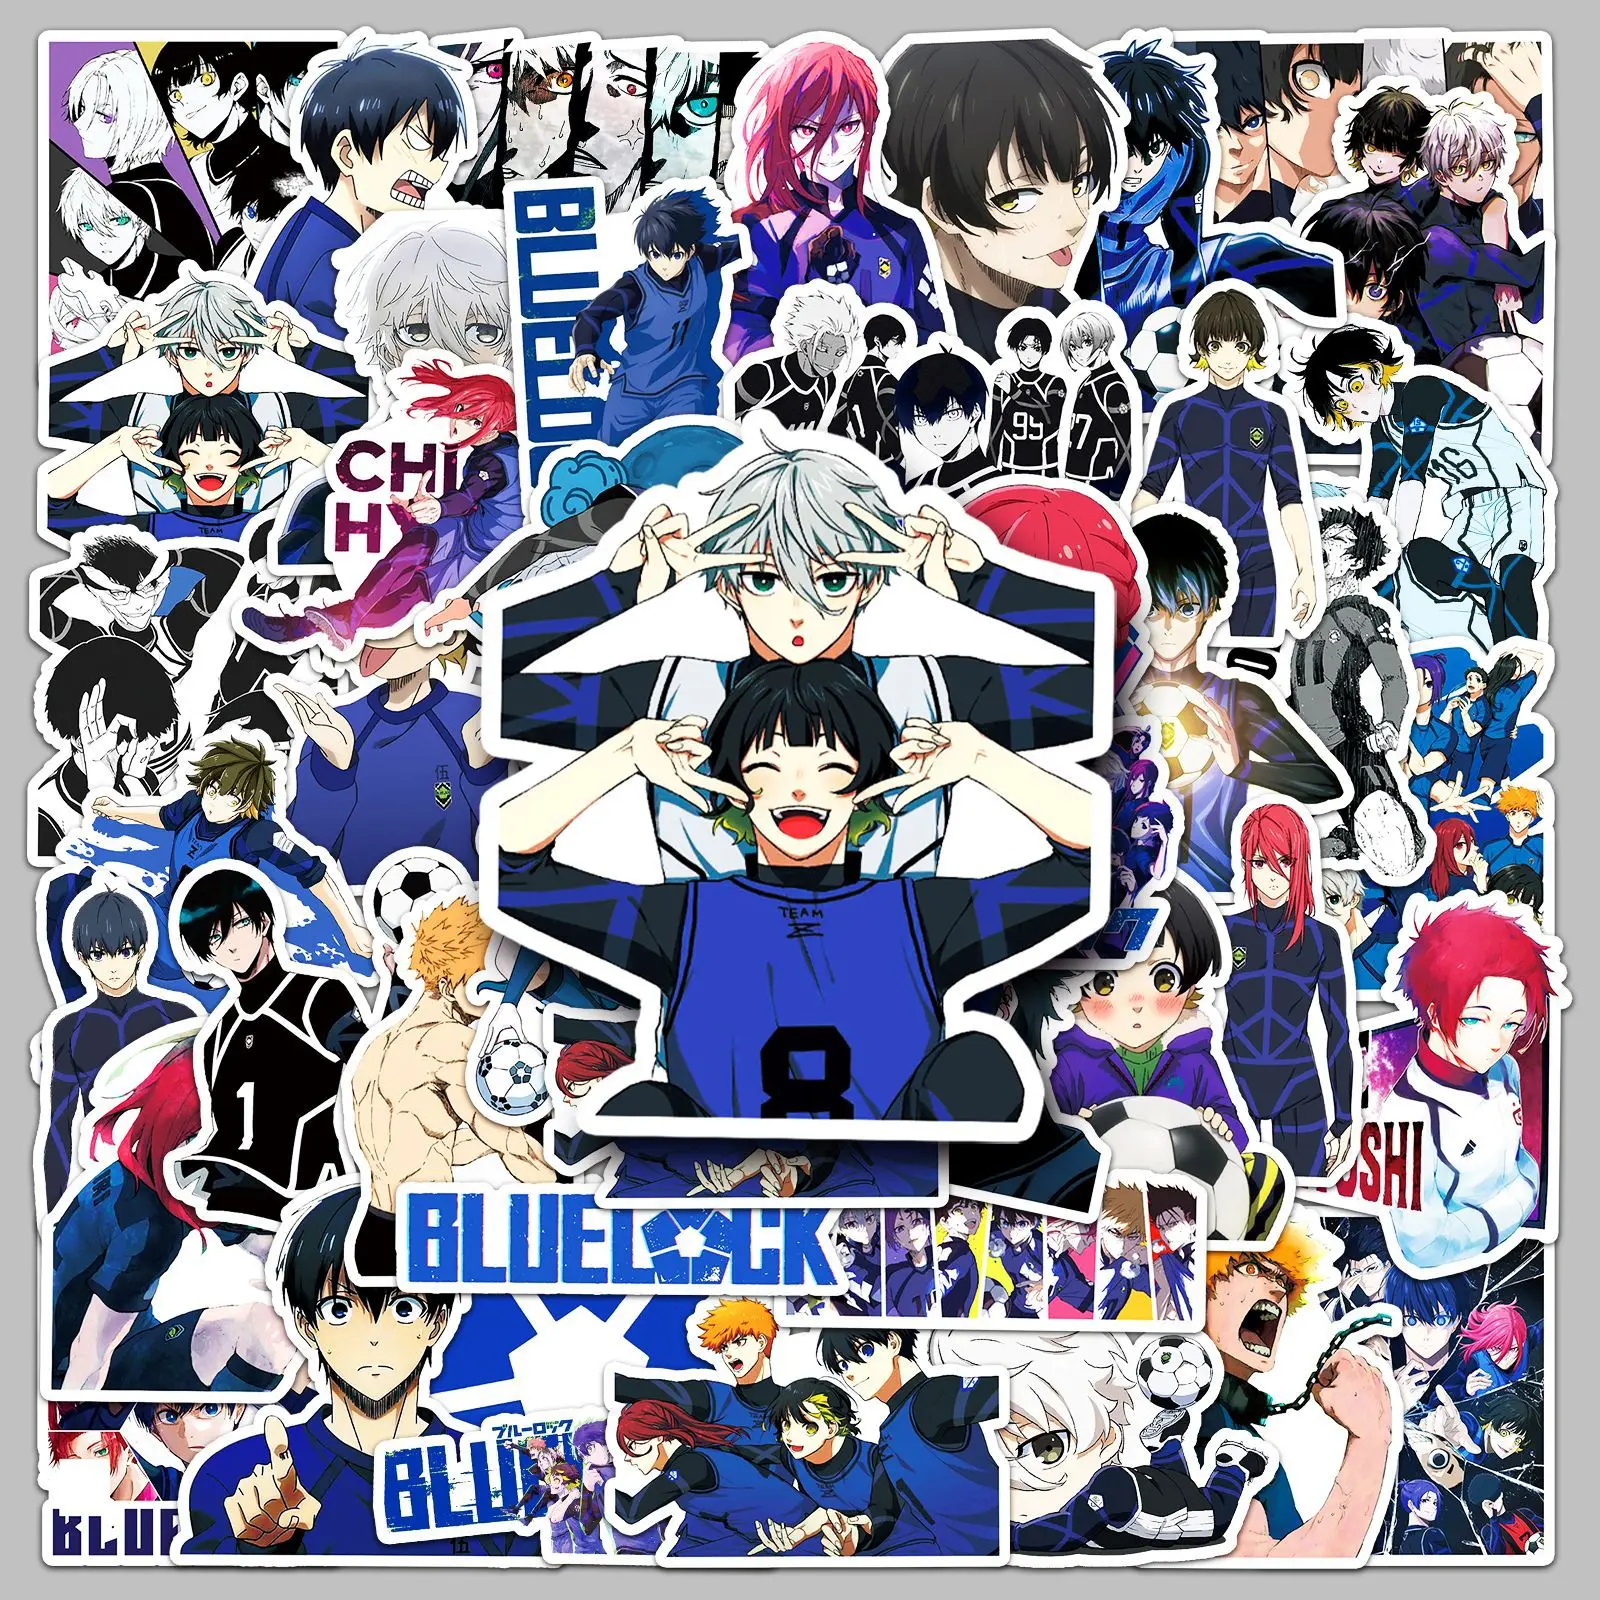 50 Pcs Anime BLUE LOCK Waterproof Sticker DIY Cartoon Football Sports Anime Phone Notebook Tablets Sticker Decoration Kid Toys exams football waterproof pvc elastic soccer ball for kids students official size 3 5 ideal for exams training for kids